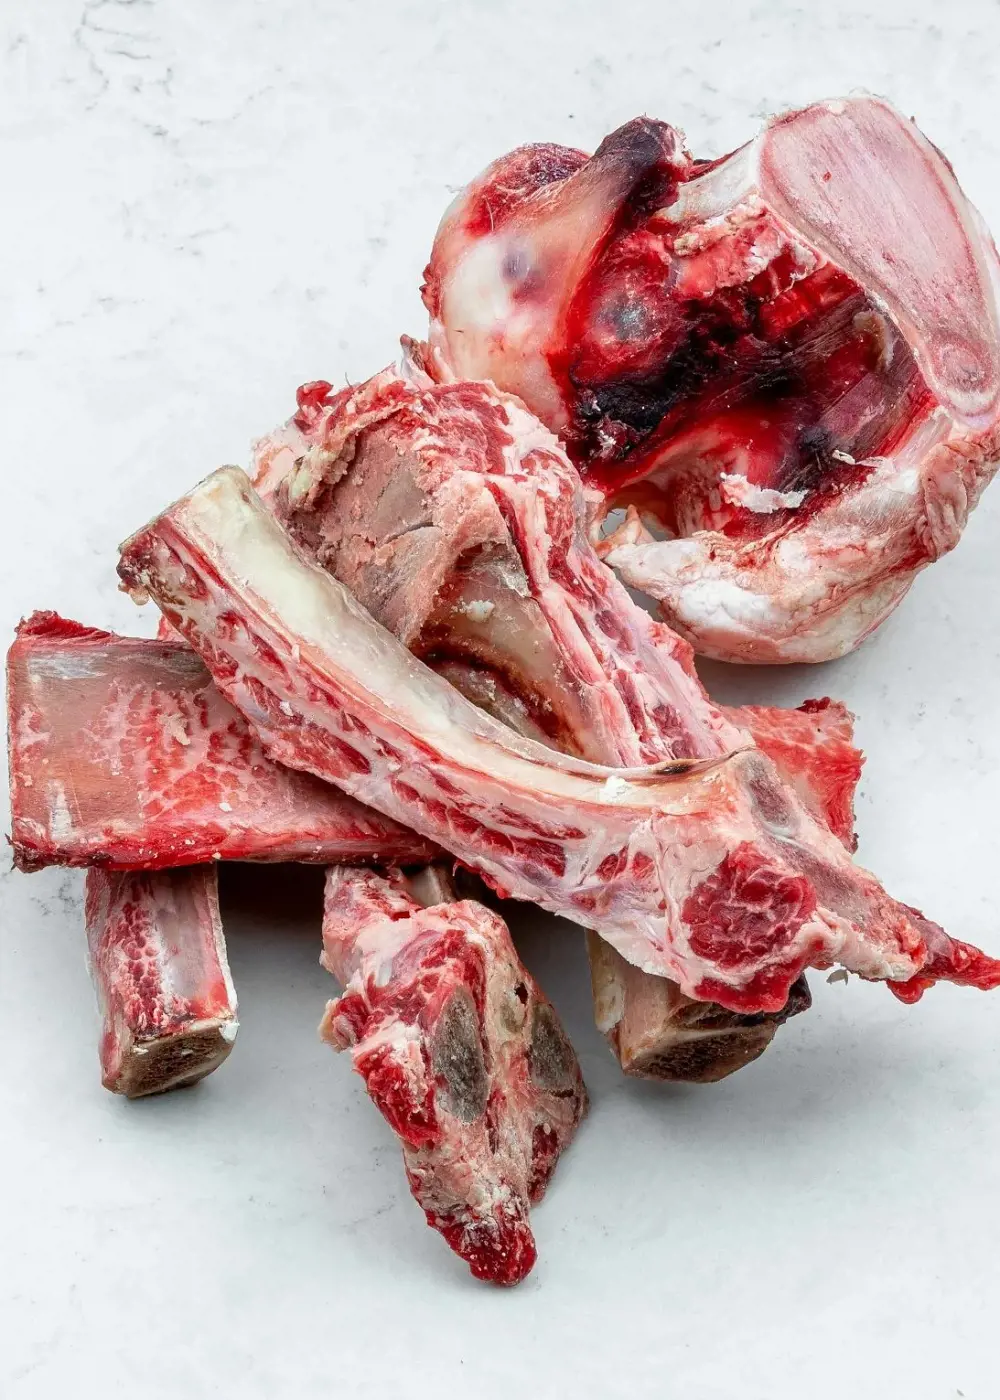 Consuming meat with bones poses a choking risk for the kids, so cut it into small pieces before serving it